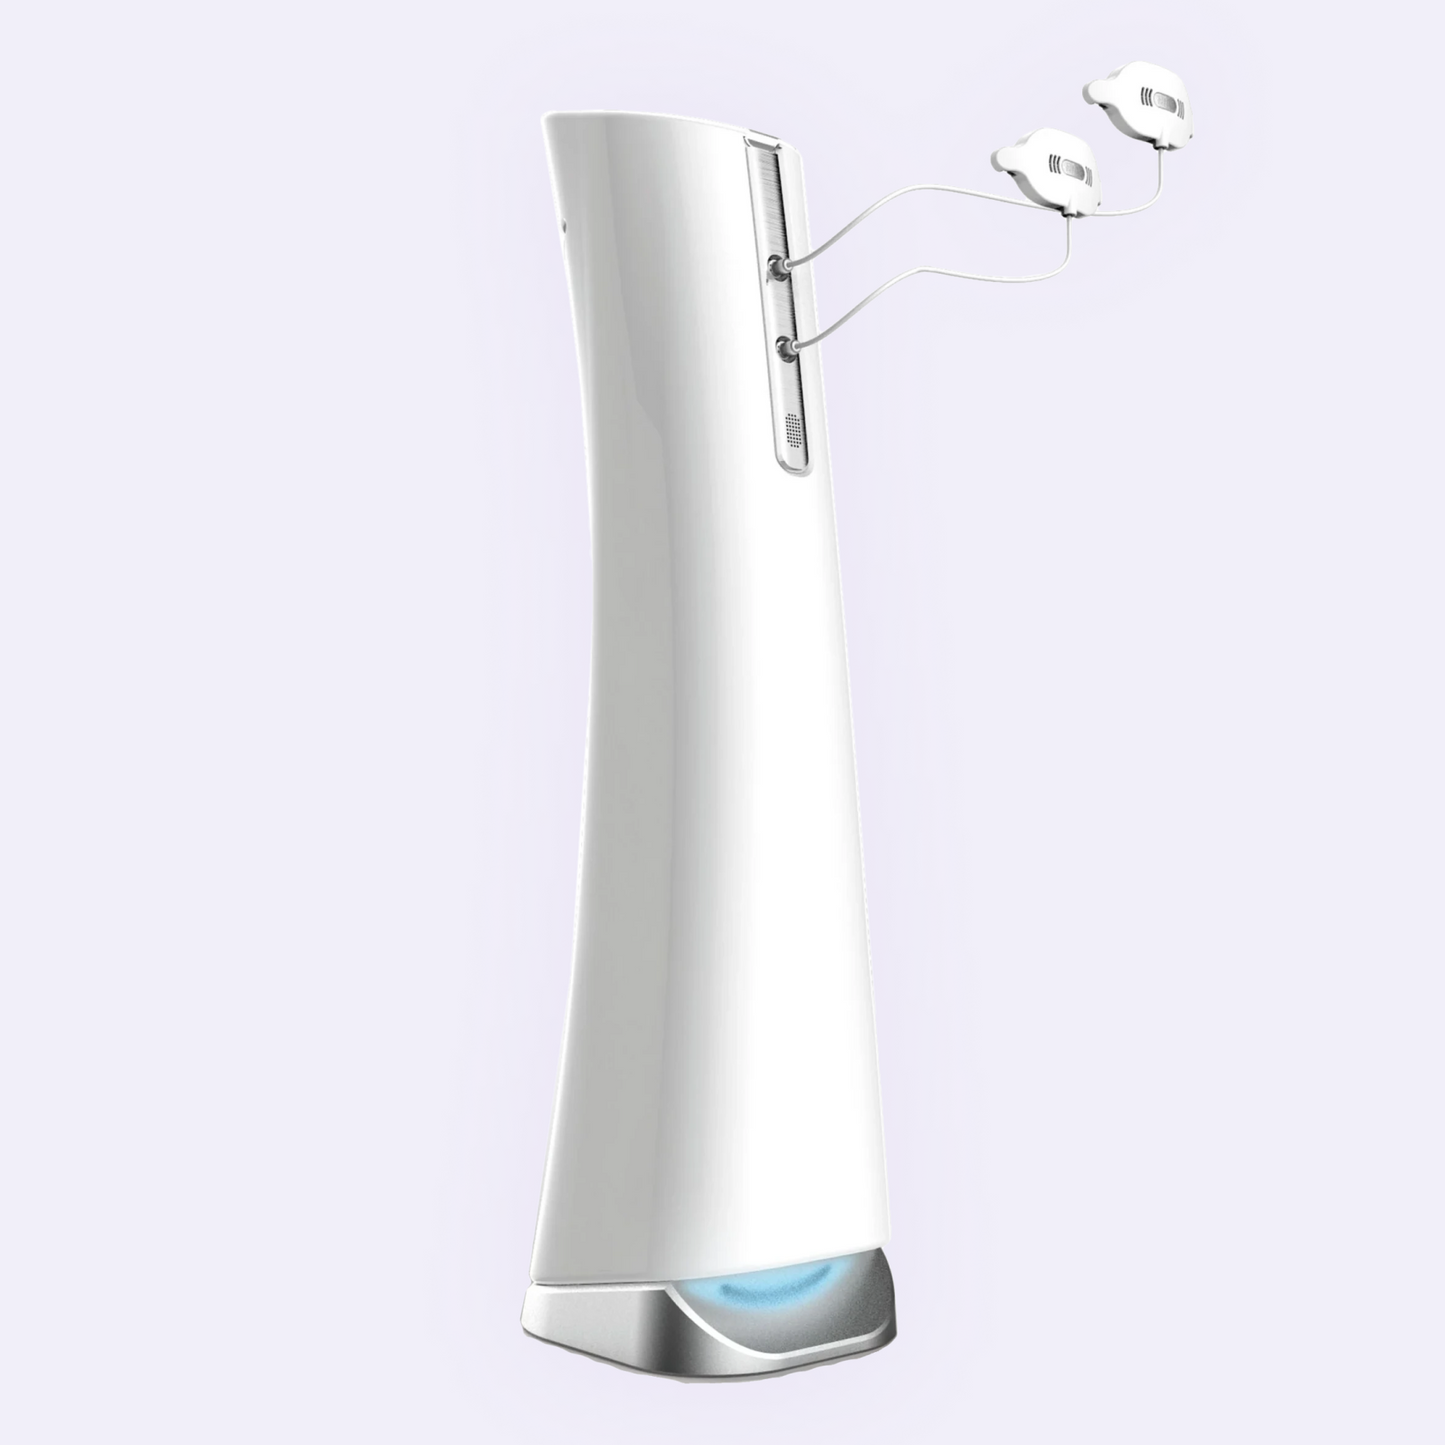 Beyond II ULTRA Whitening accelerator (Includes 1 x LED LIGHT)